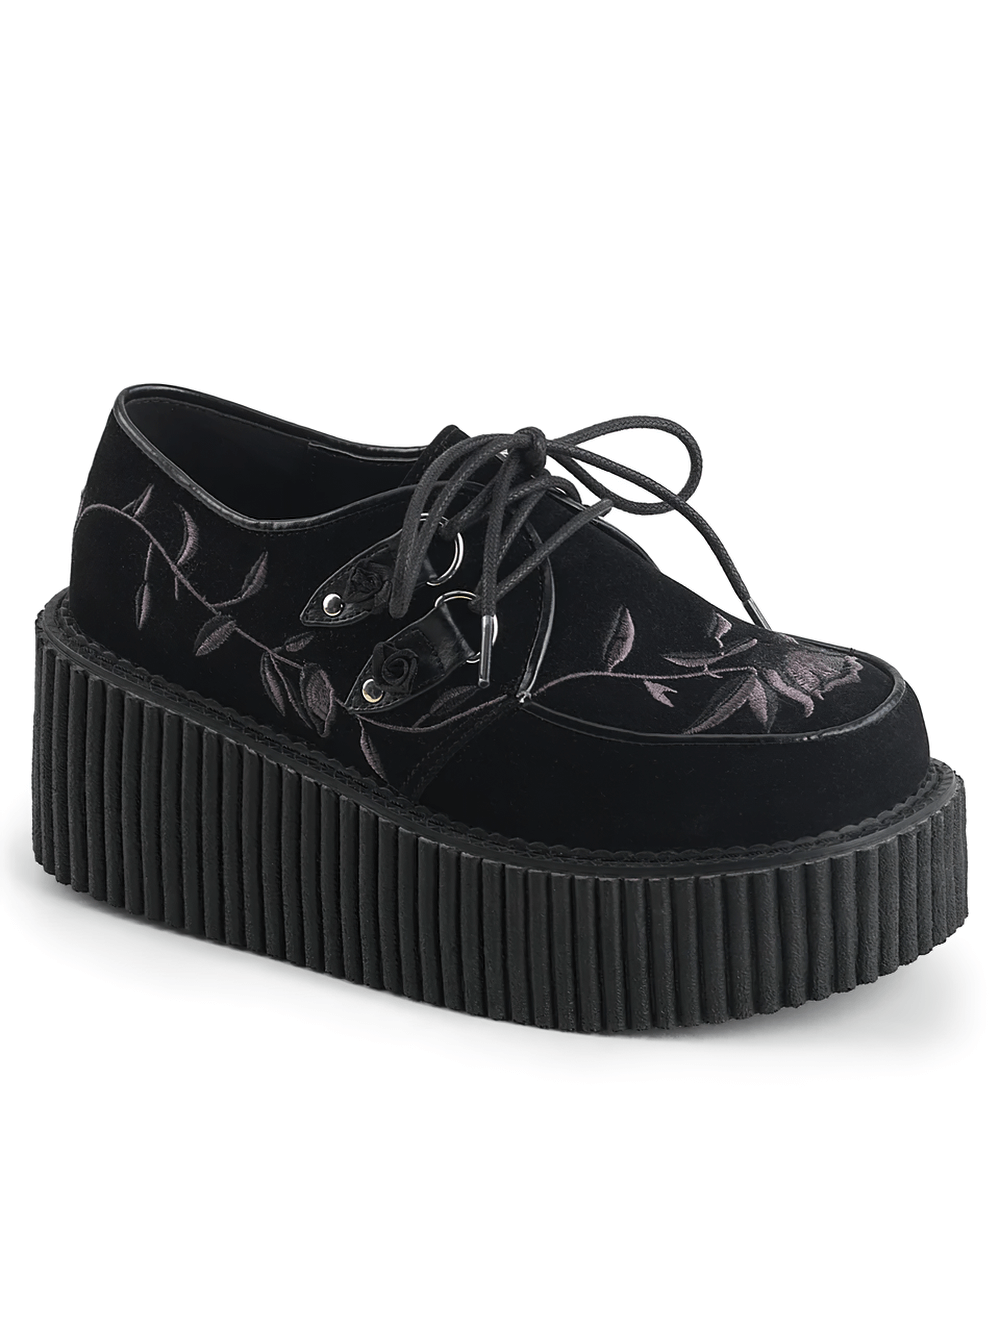 DEMONIA Floral Embroidered Black Lace-Up Creepers